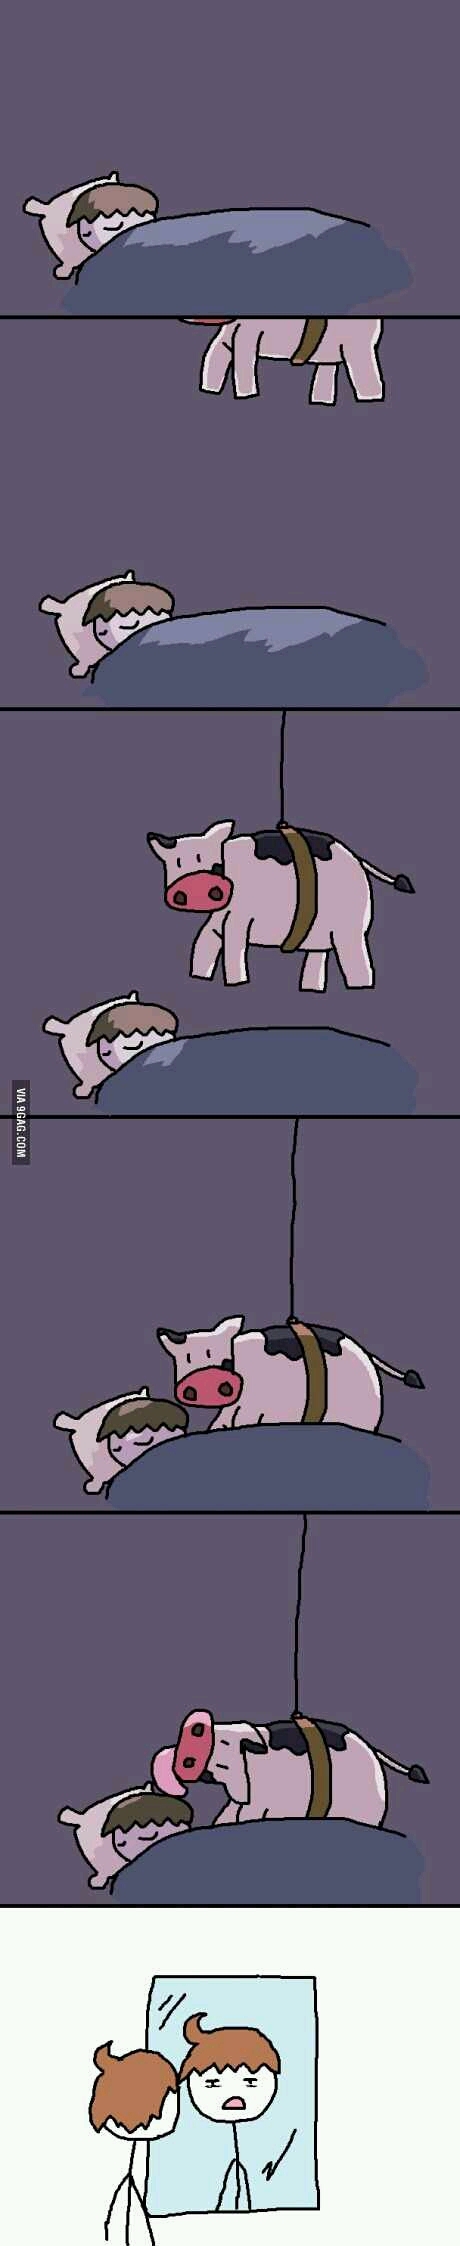 So the cow jumped over the moon, tied itself to it, then proceeded to lower itself to your room... - meme